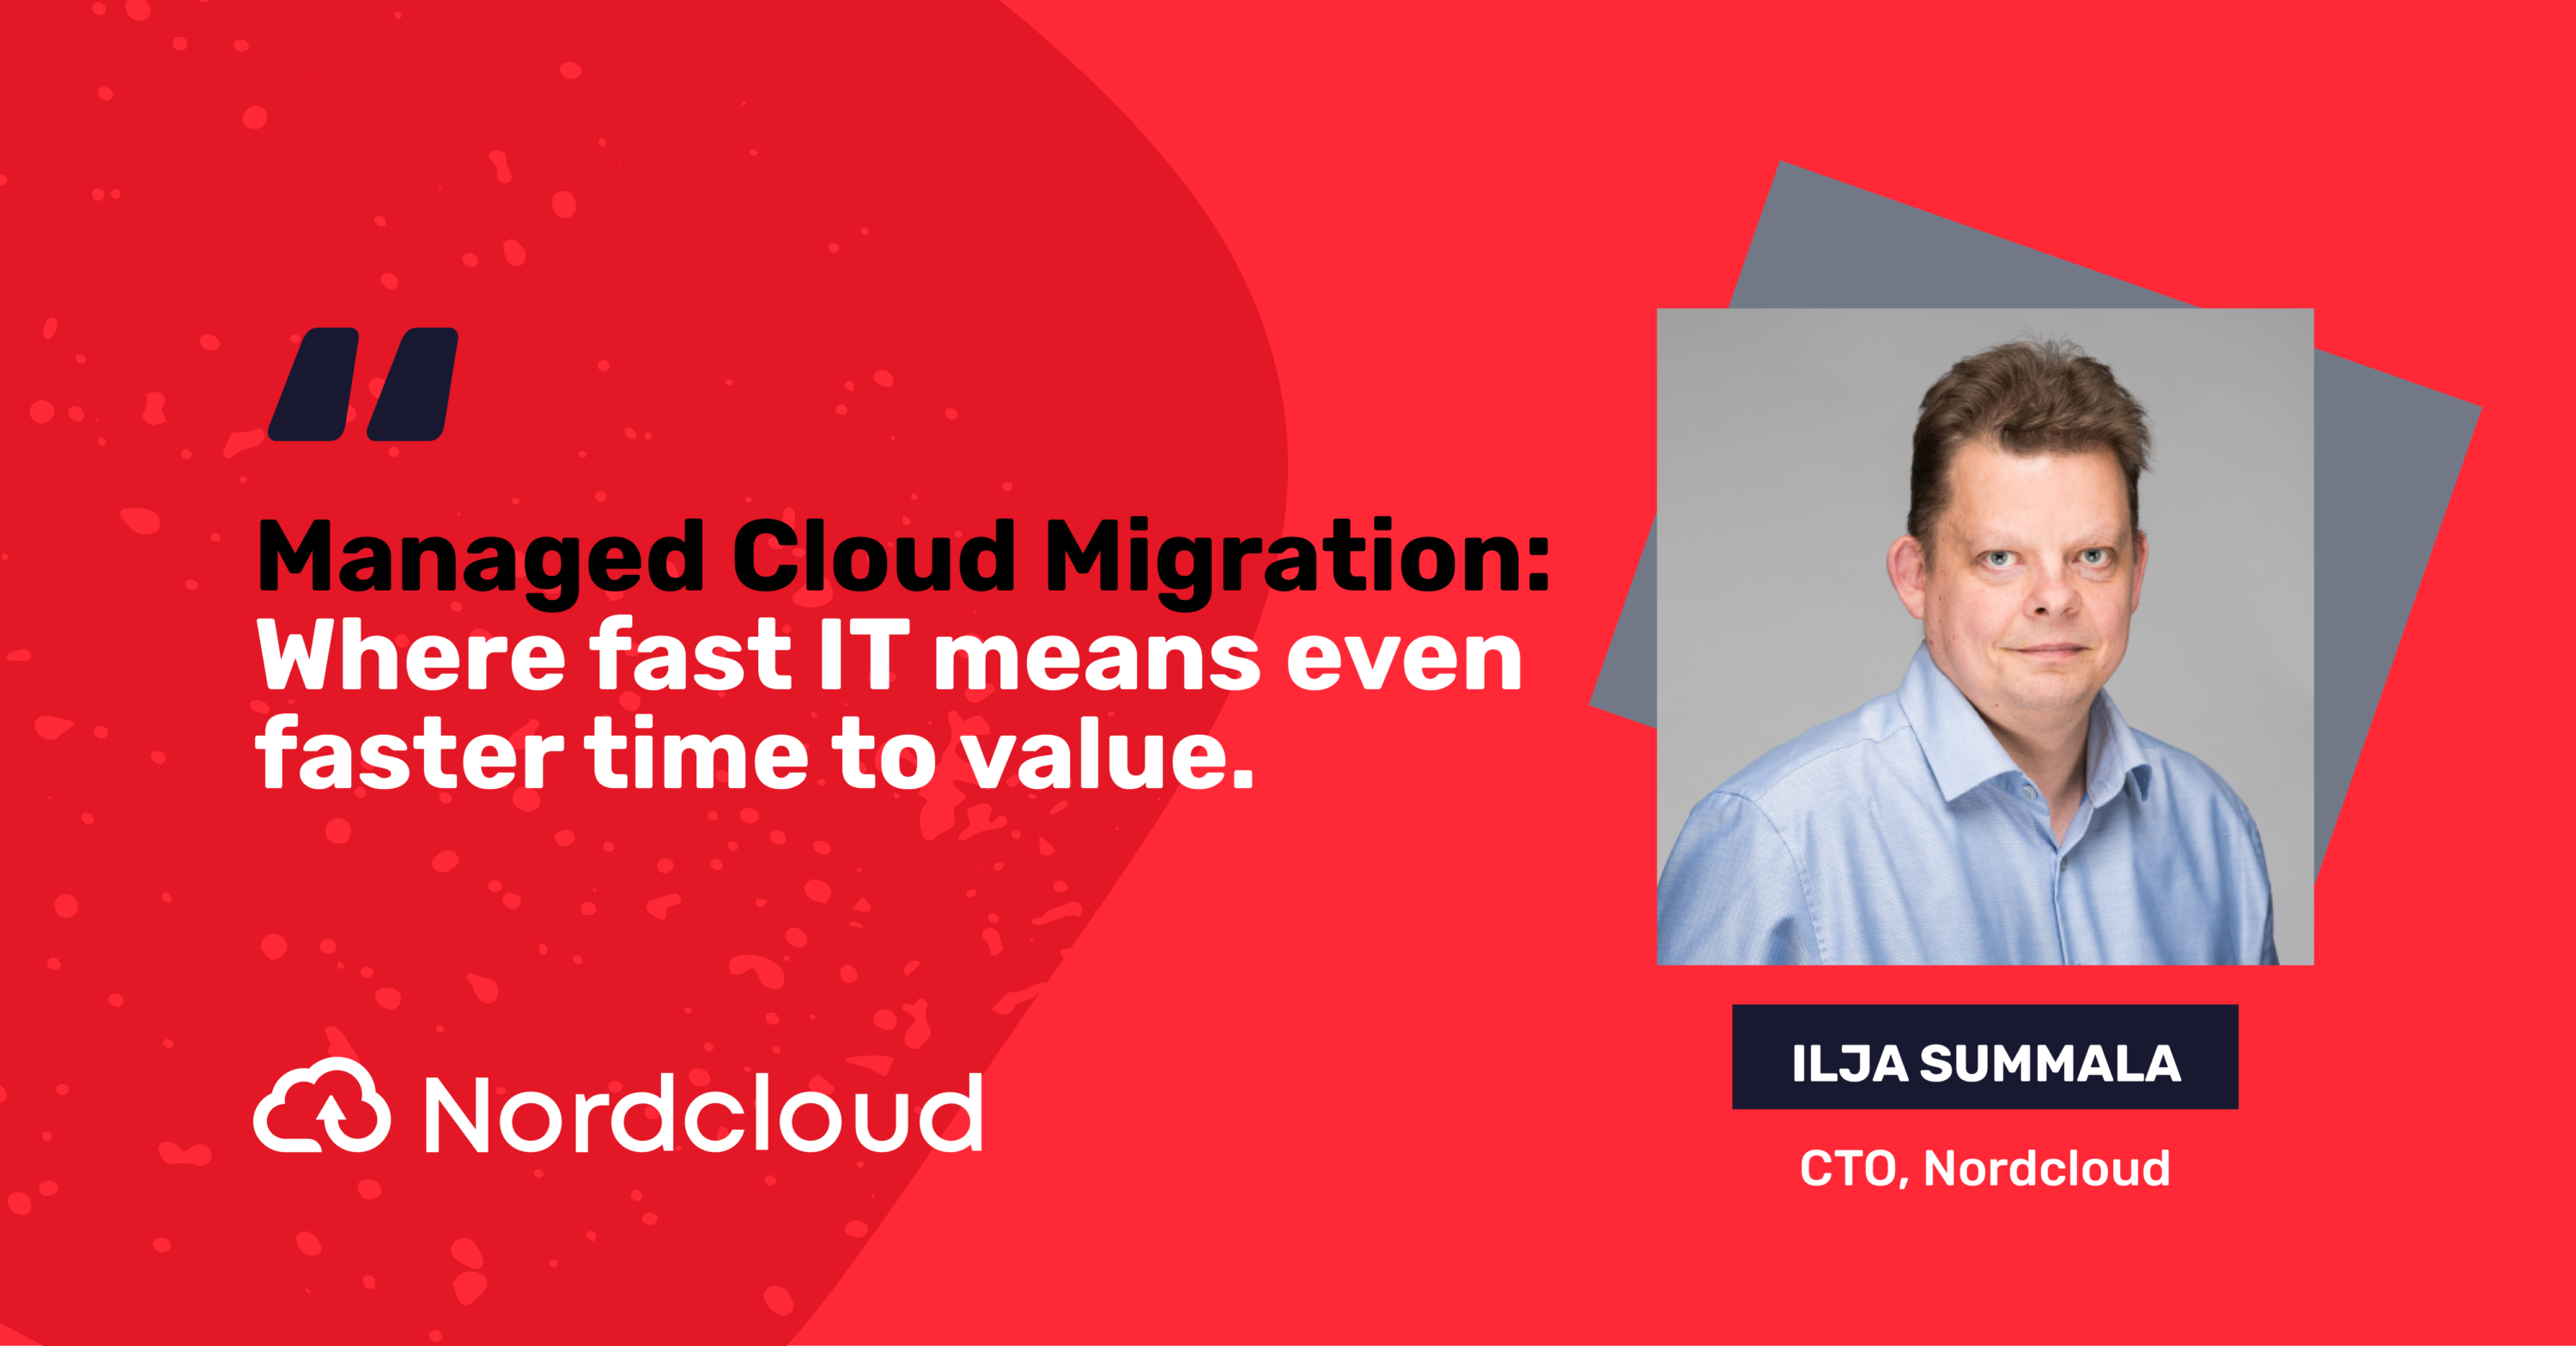 Fast time to value with Managed Cloud Migration